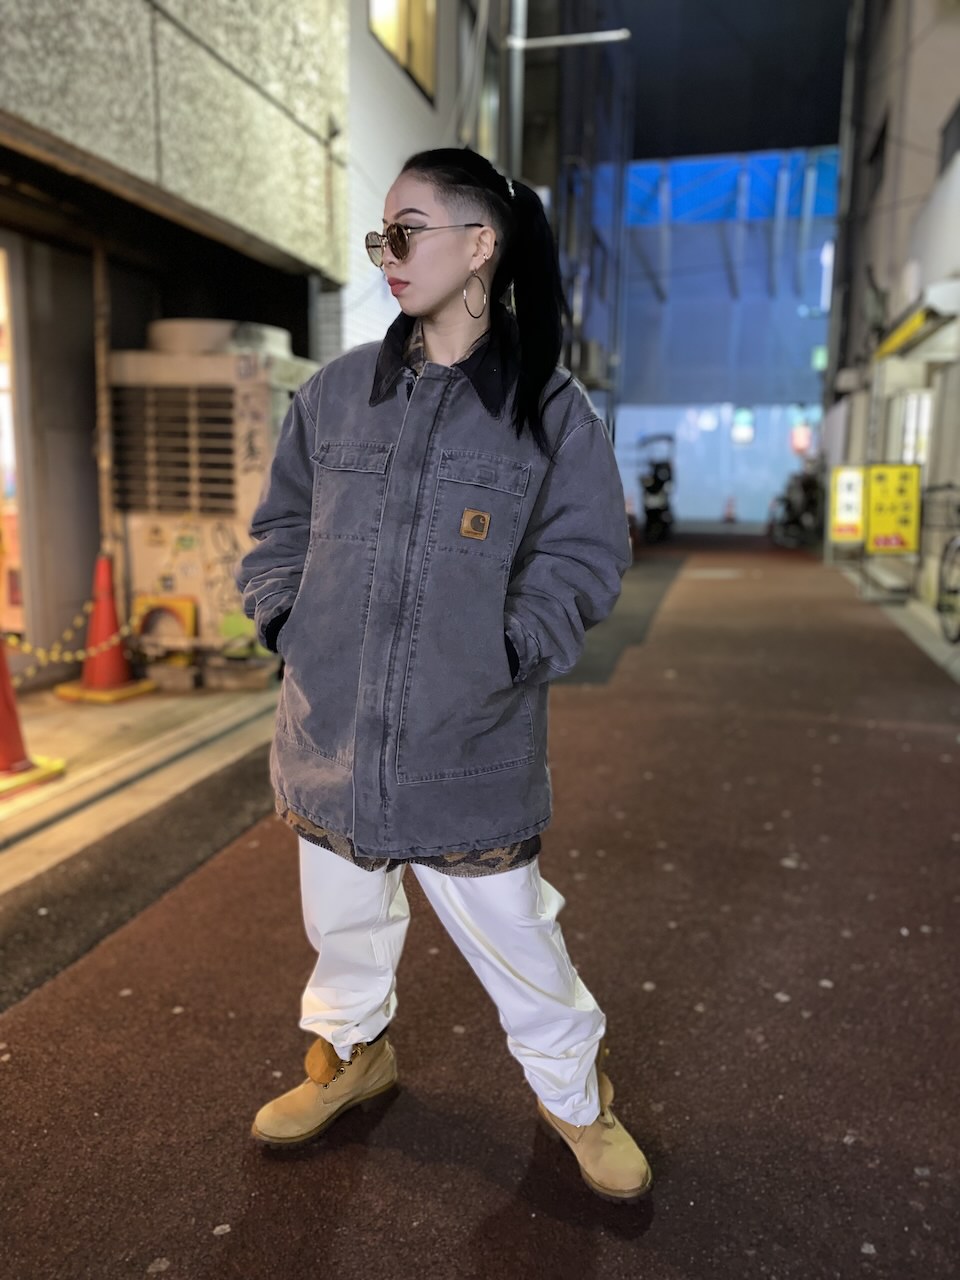 Carhartt Traditional style